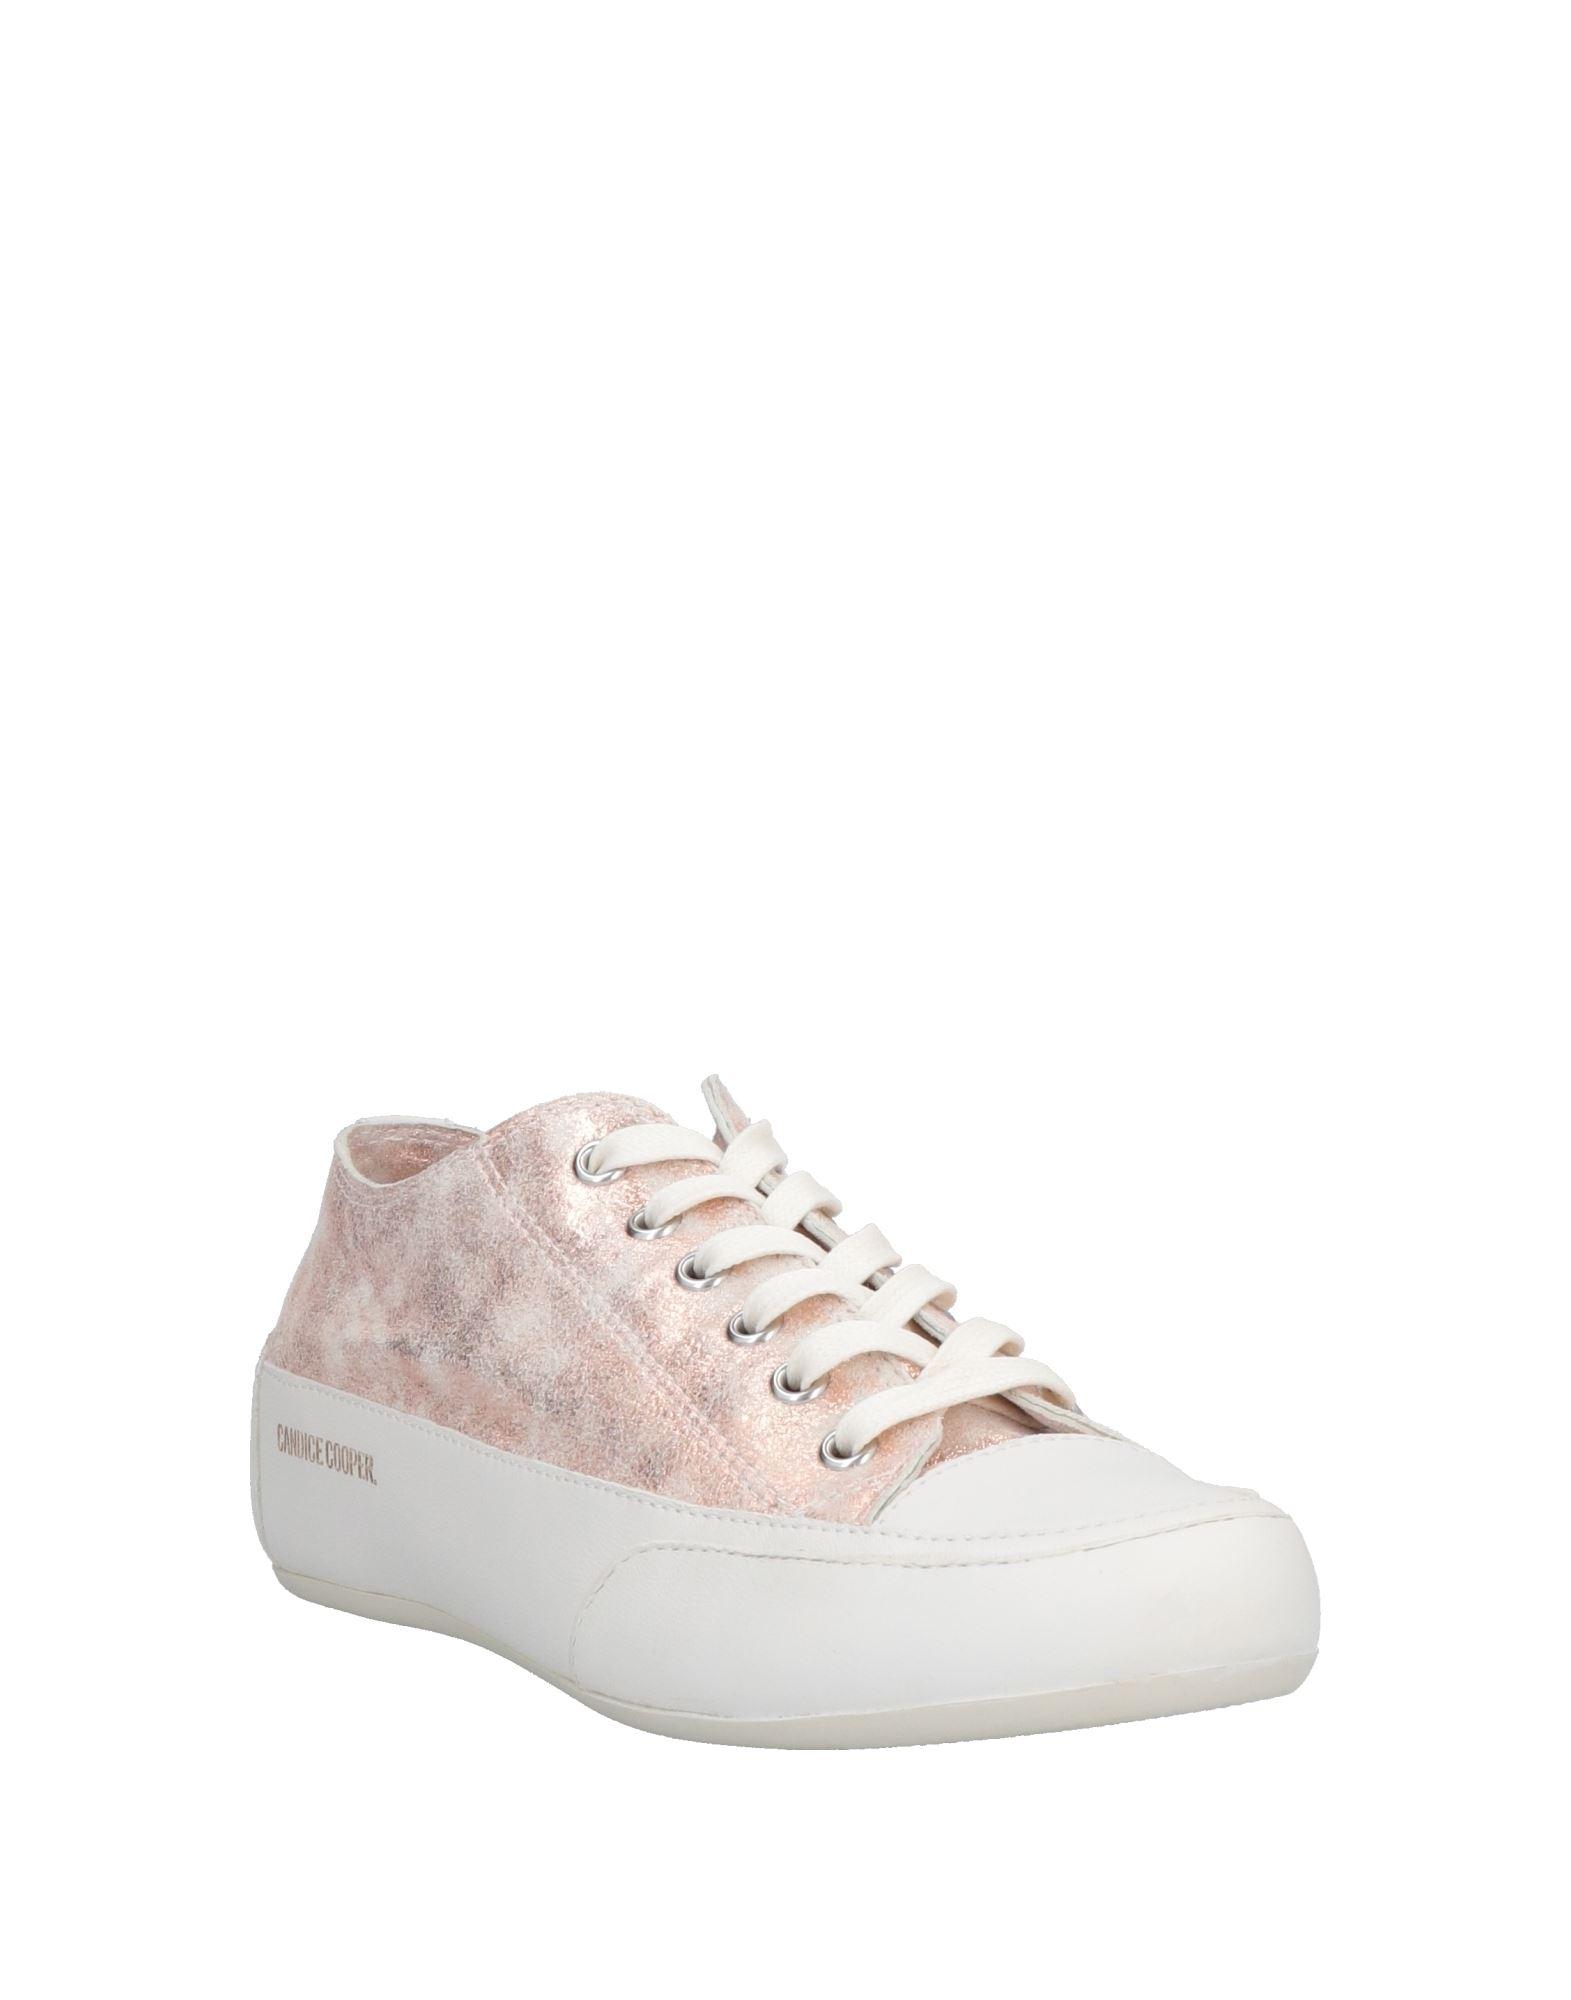 Candice Cooper Trainers | Lyst